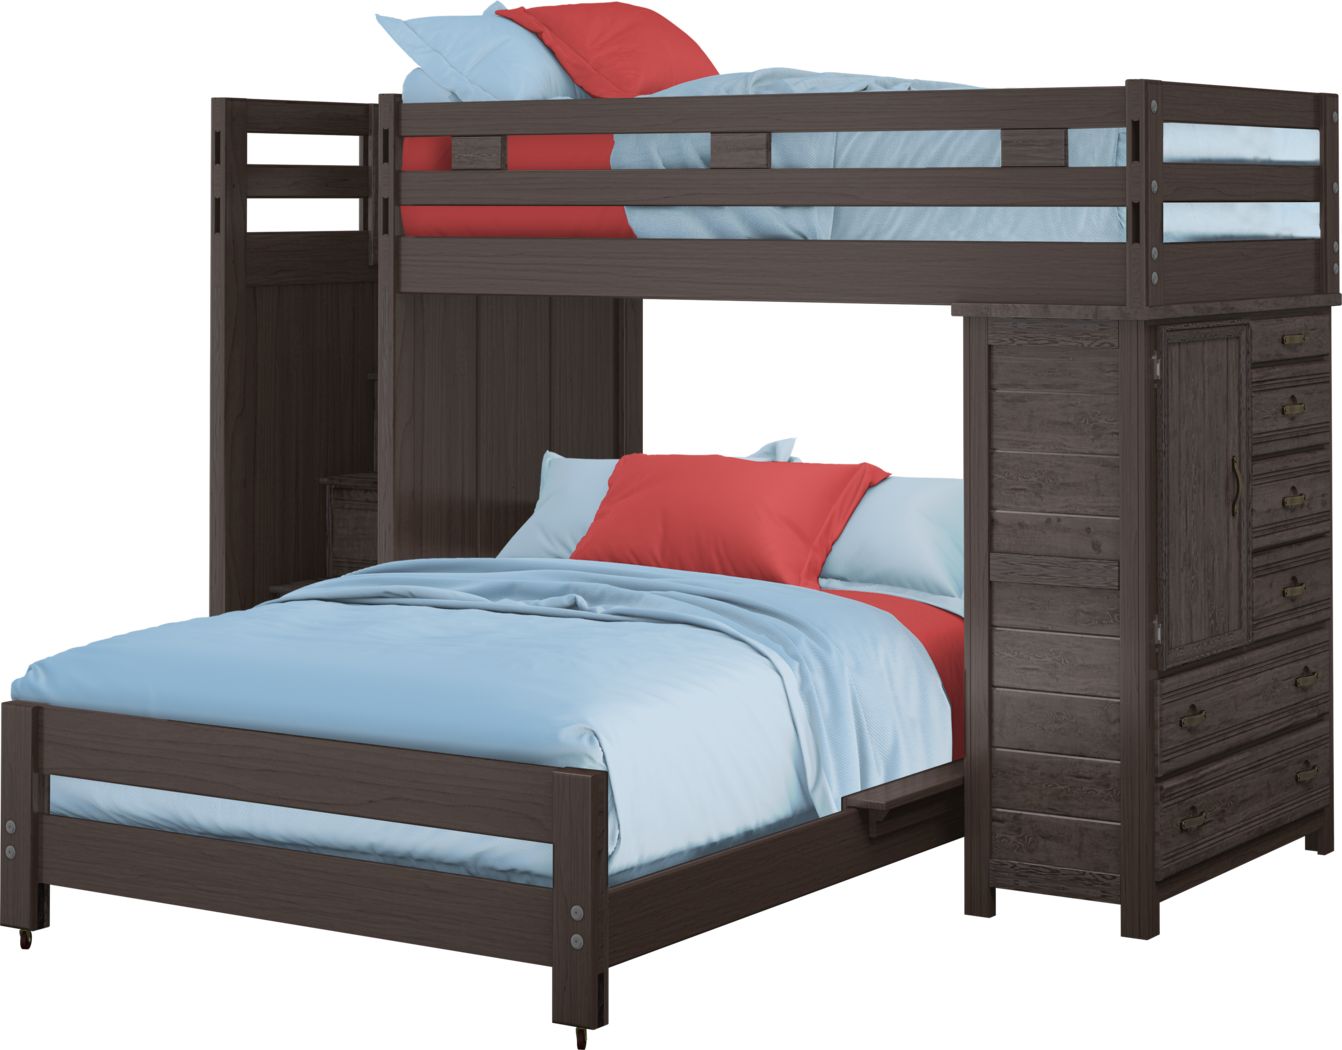 Creekside Charcoal Twin Full Step Bunk, Twin Full Step Bunk Bed